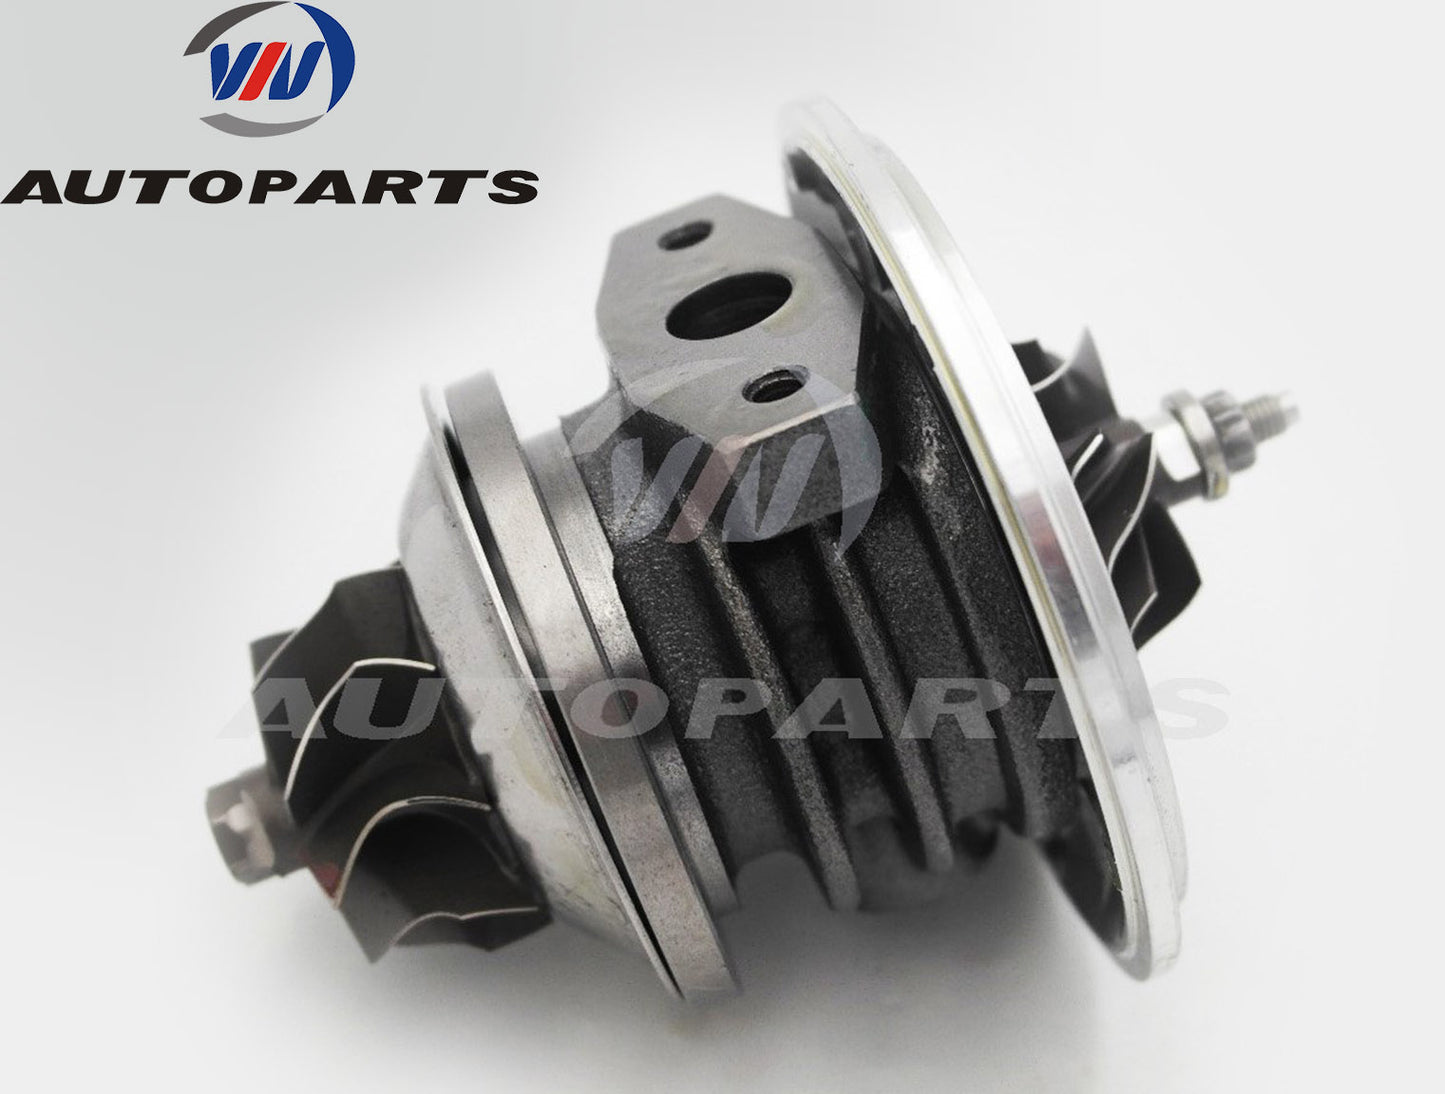 CHRA 435796-0020 for Turbocharger 454064-0001 for VW Commercial T4 Bus with Umwelt 1.9L Engine Diesel